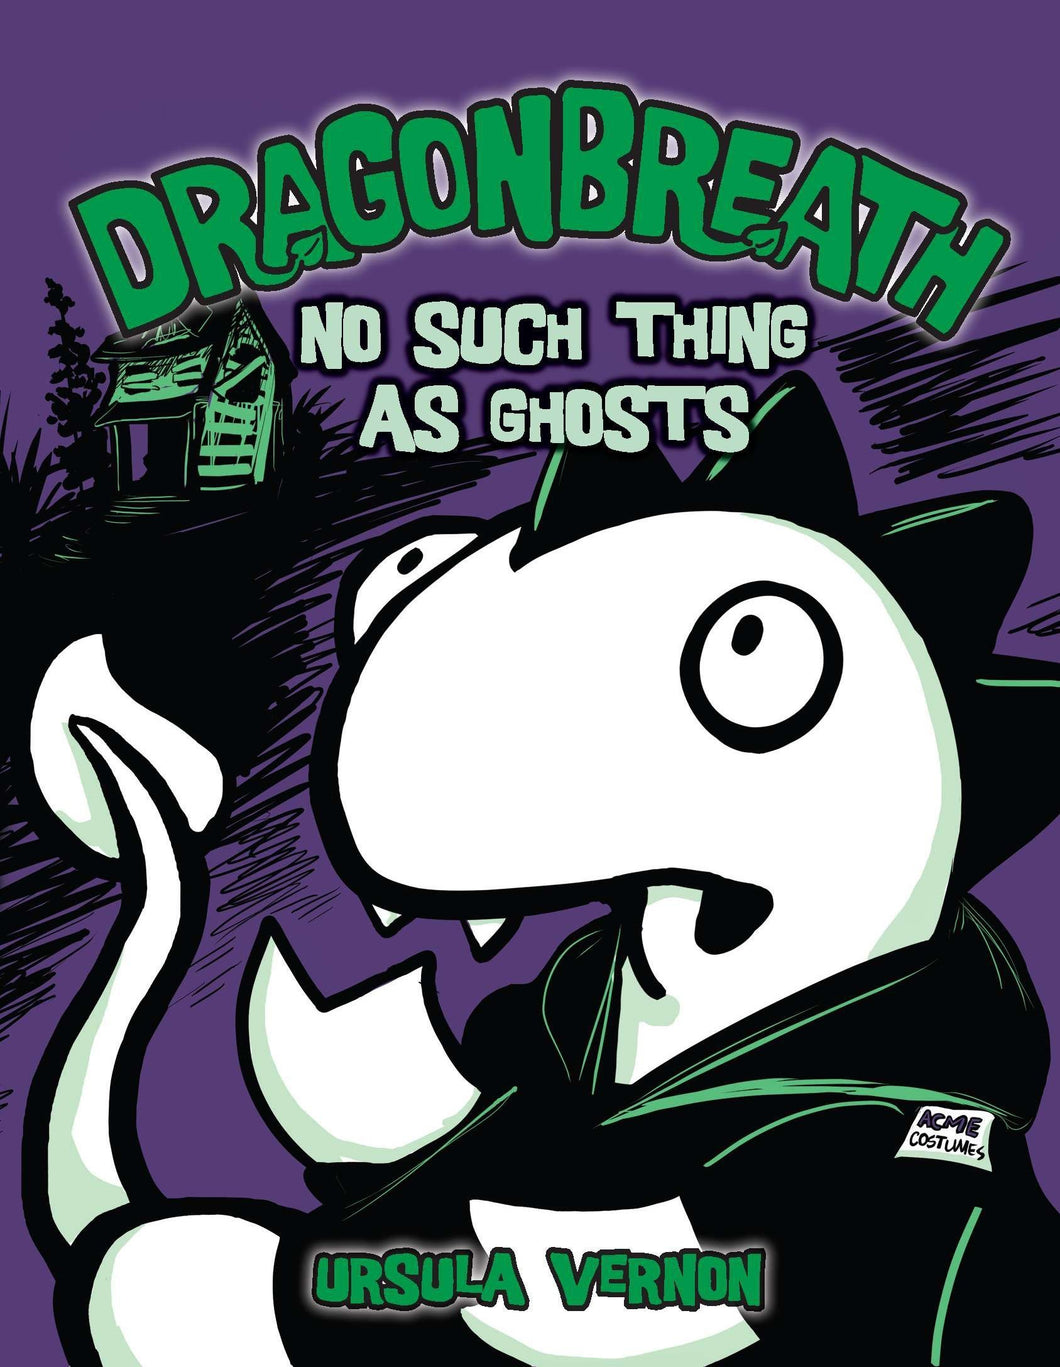 No Such Thing as Ghosts (Dragonbreath Book 5)